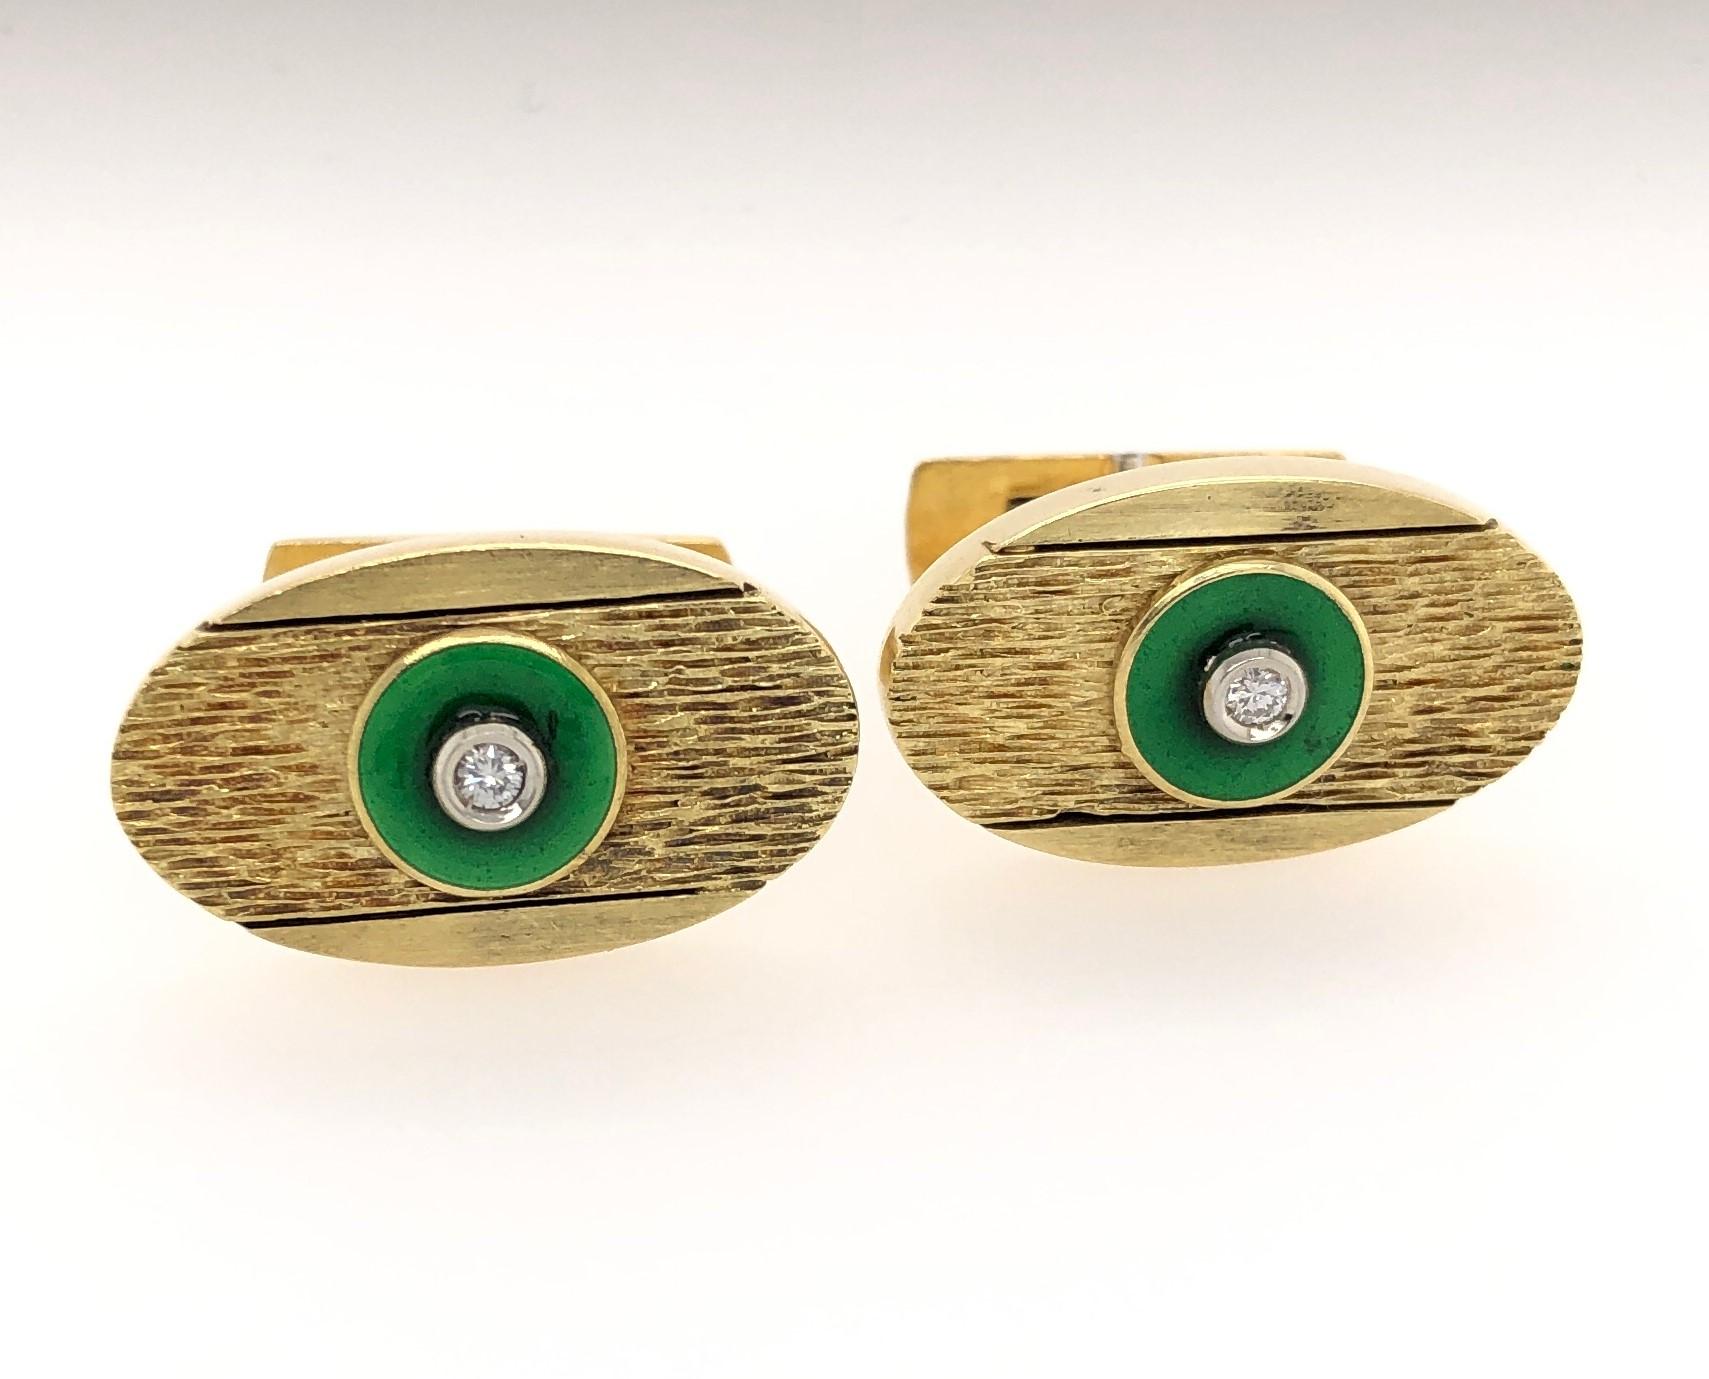 For the dapper dresser, eighteen carat 18K yellow gold oval cuff links with green enamel applique showcasing a bezel set round cut diamond.
Measuring approximately 1 x 5/8 inch with textured satin gold detailing to handsomely offset the rich green